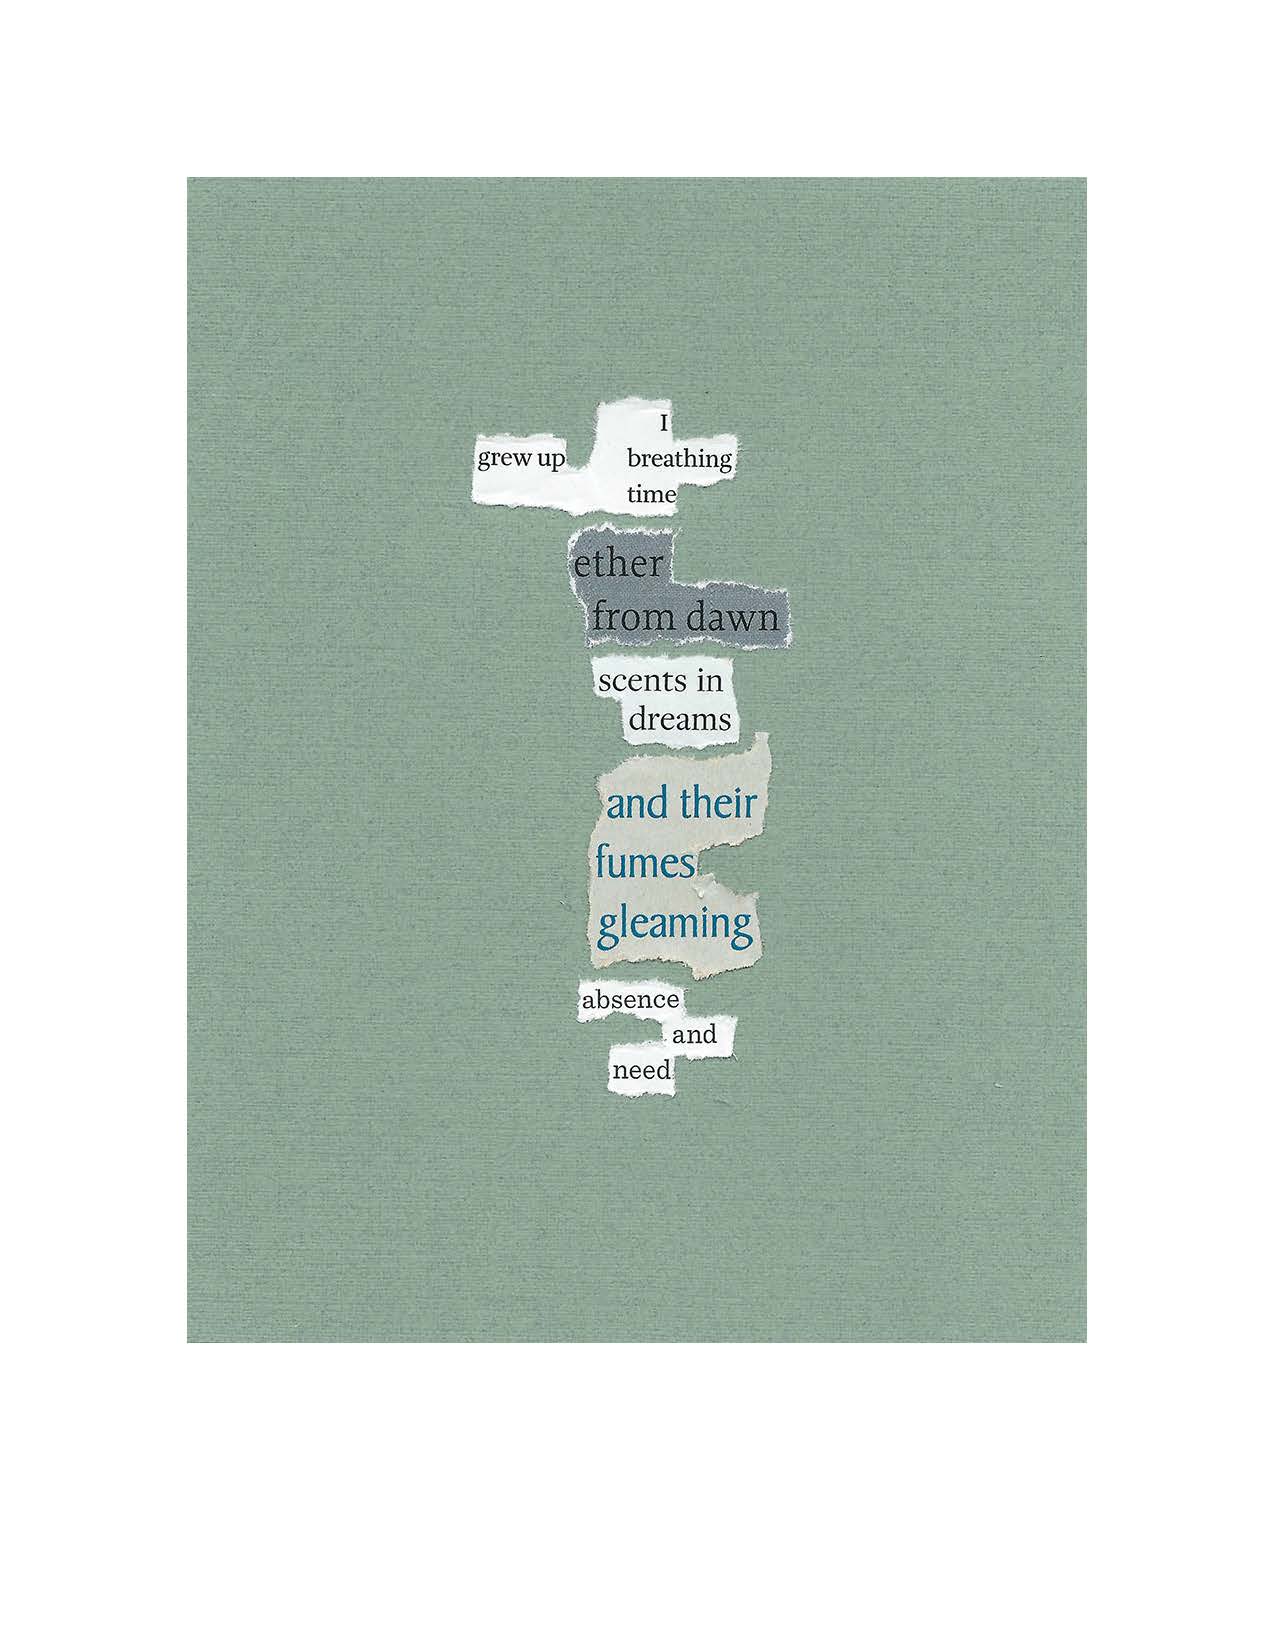 Collaged poem by J.I Kleinberg on a green background